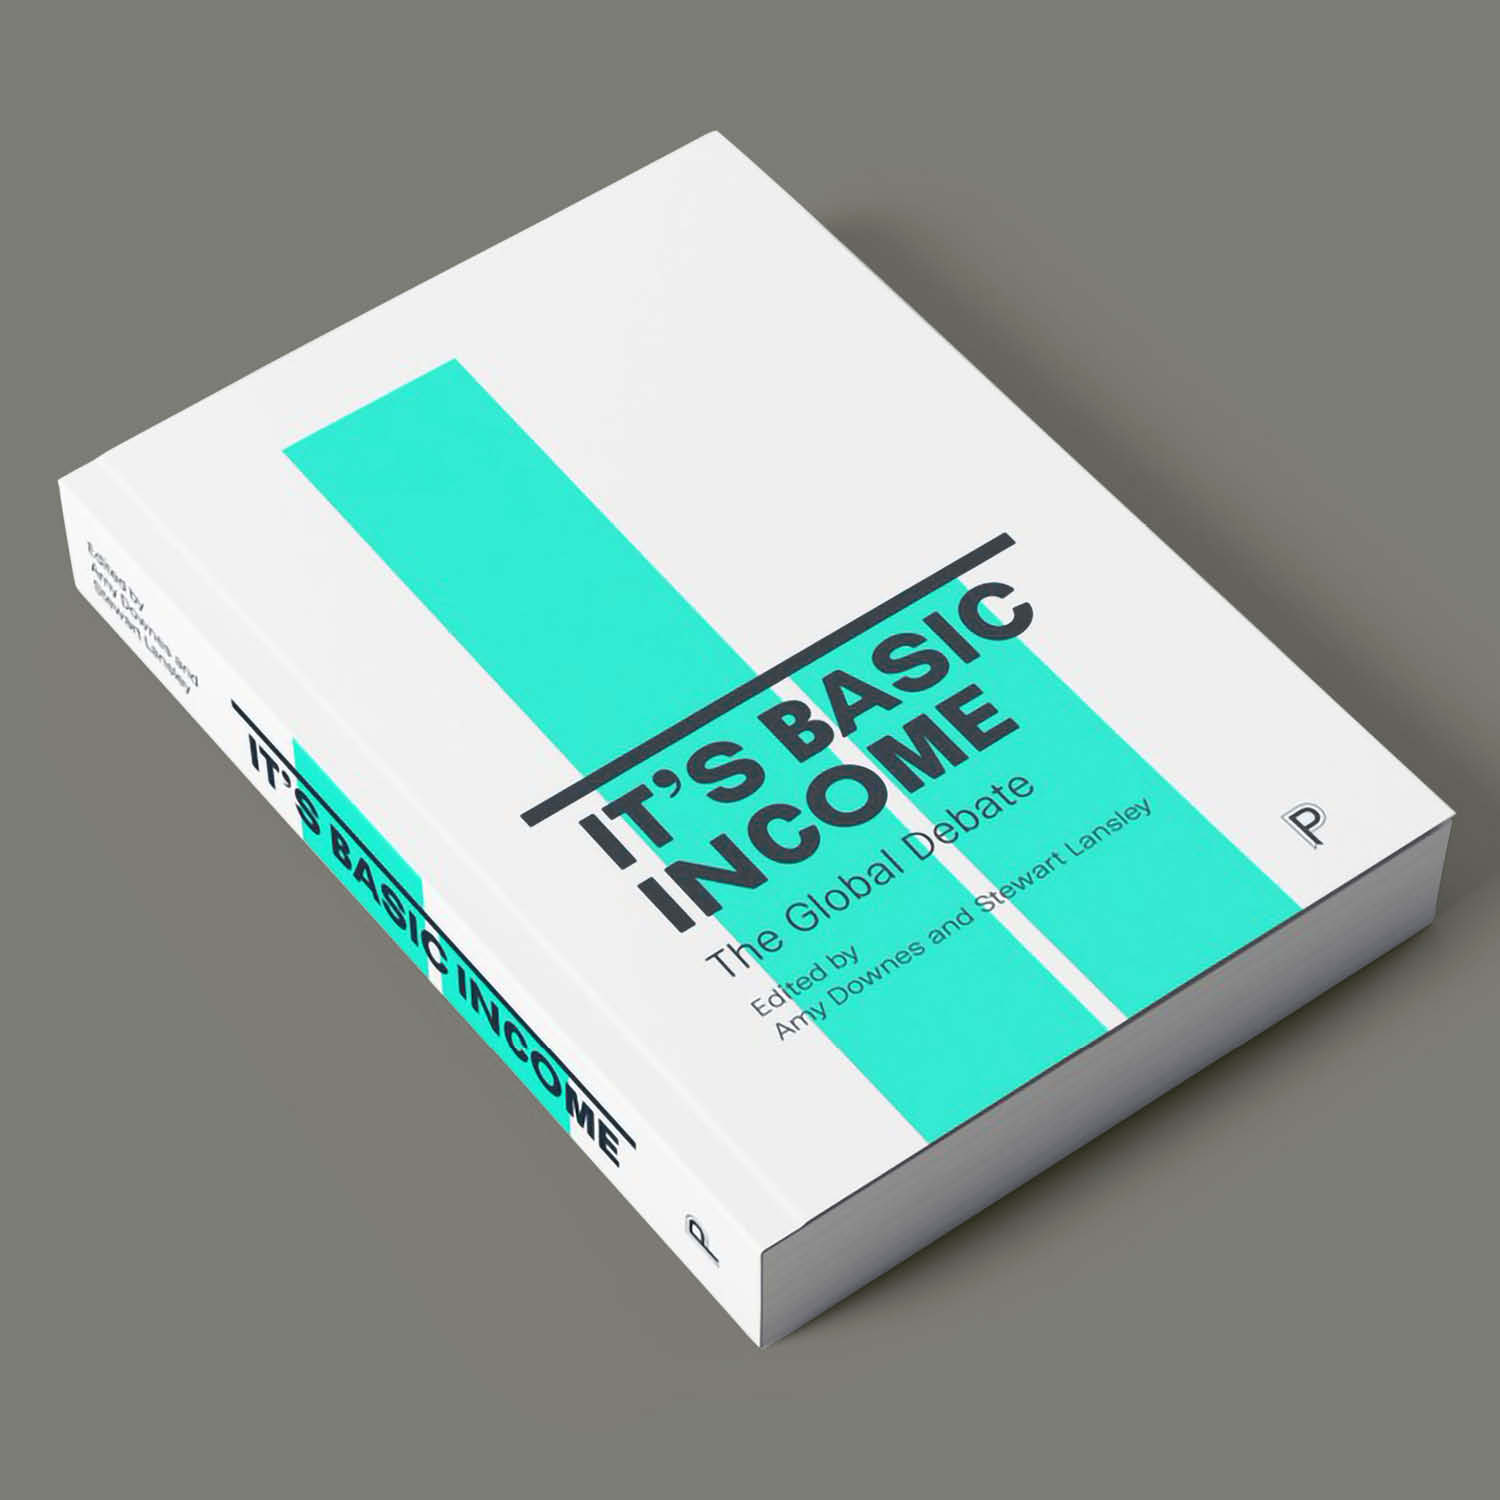 Typeface design for Amy Downes and Stewart Lansley (eds.), It’s Basic Income